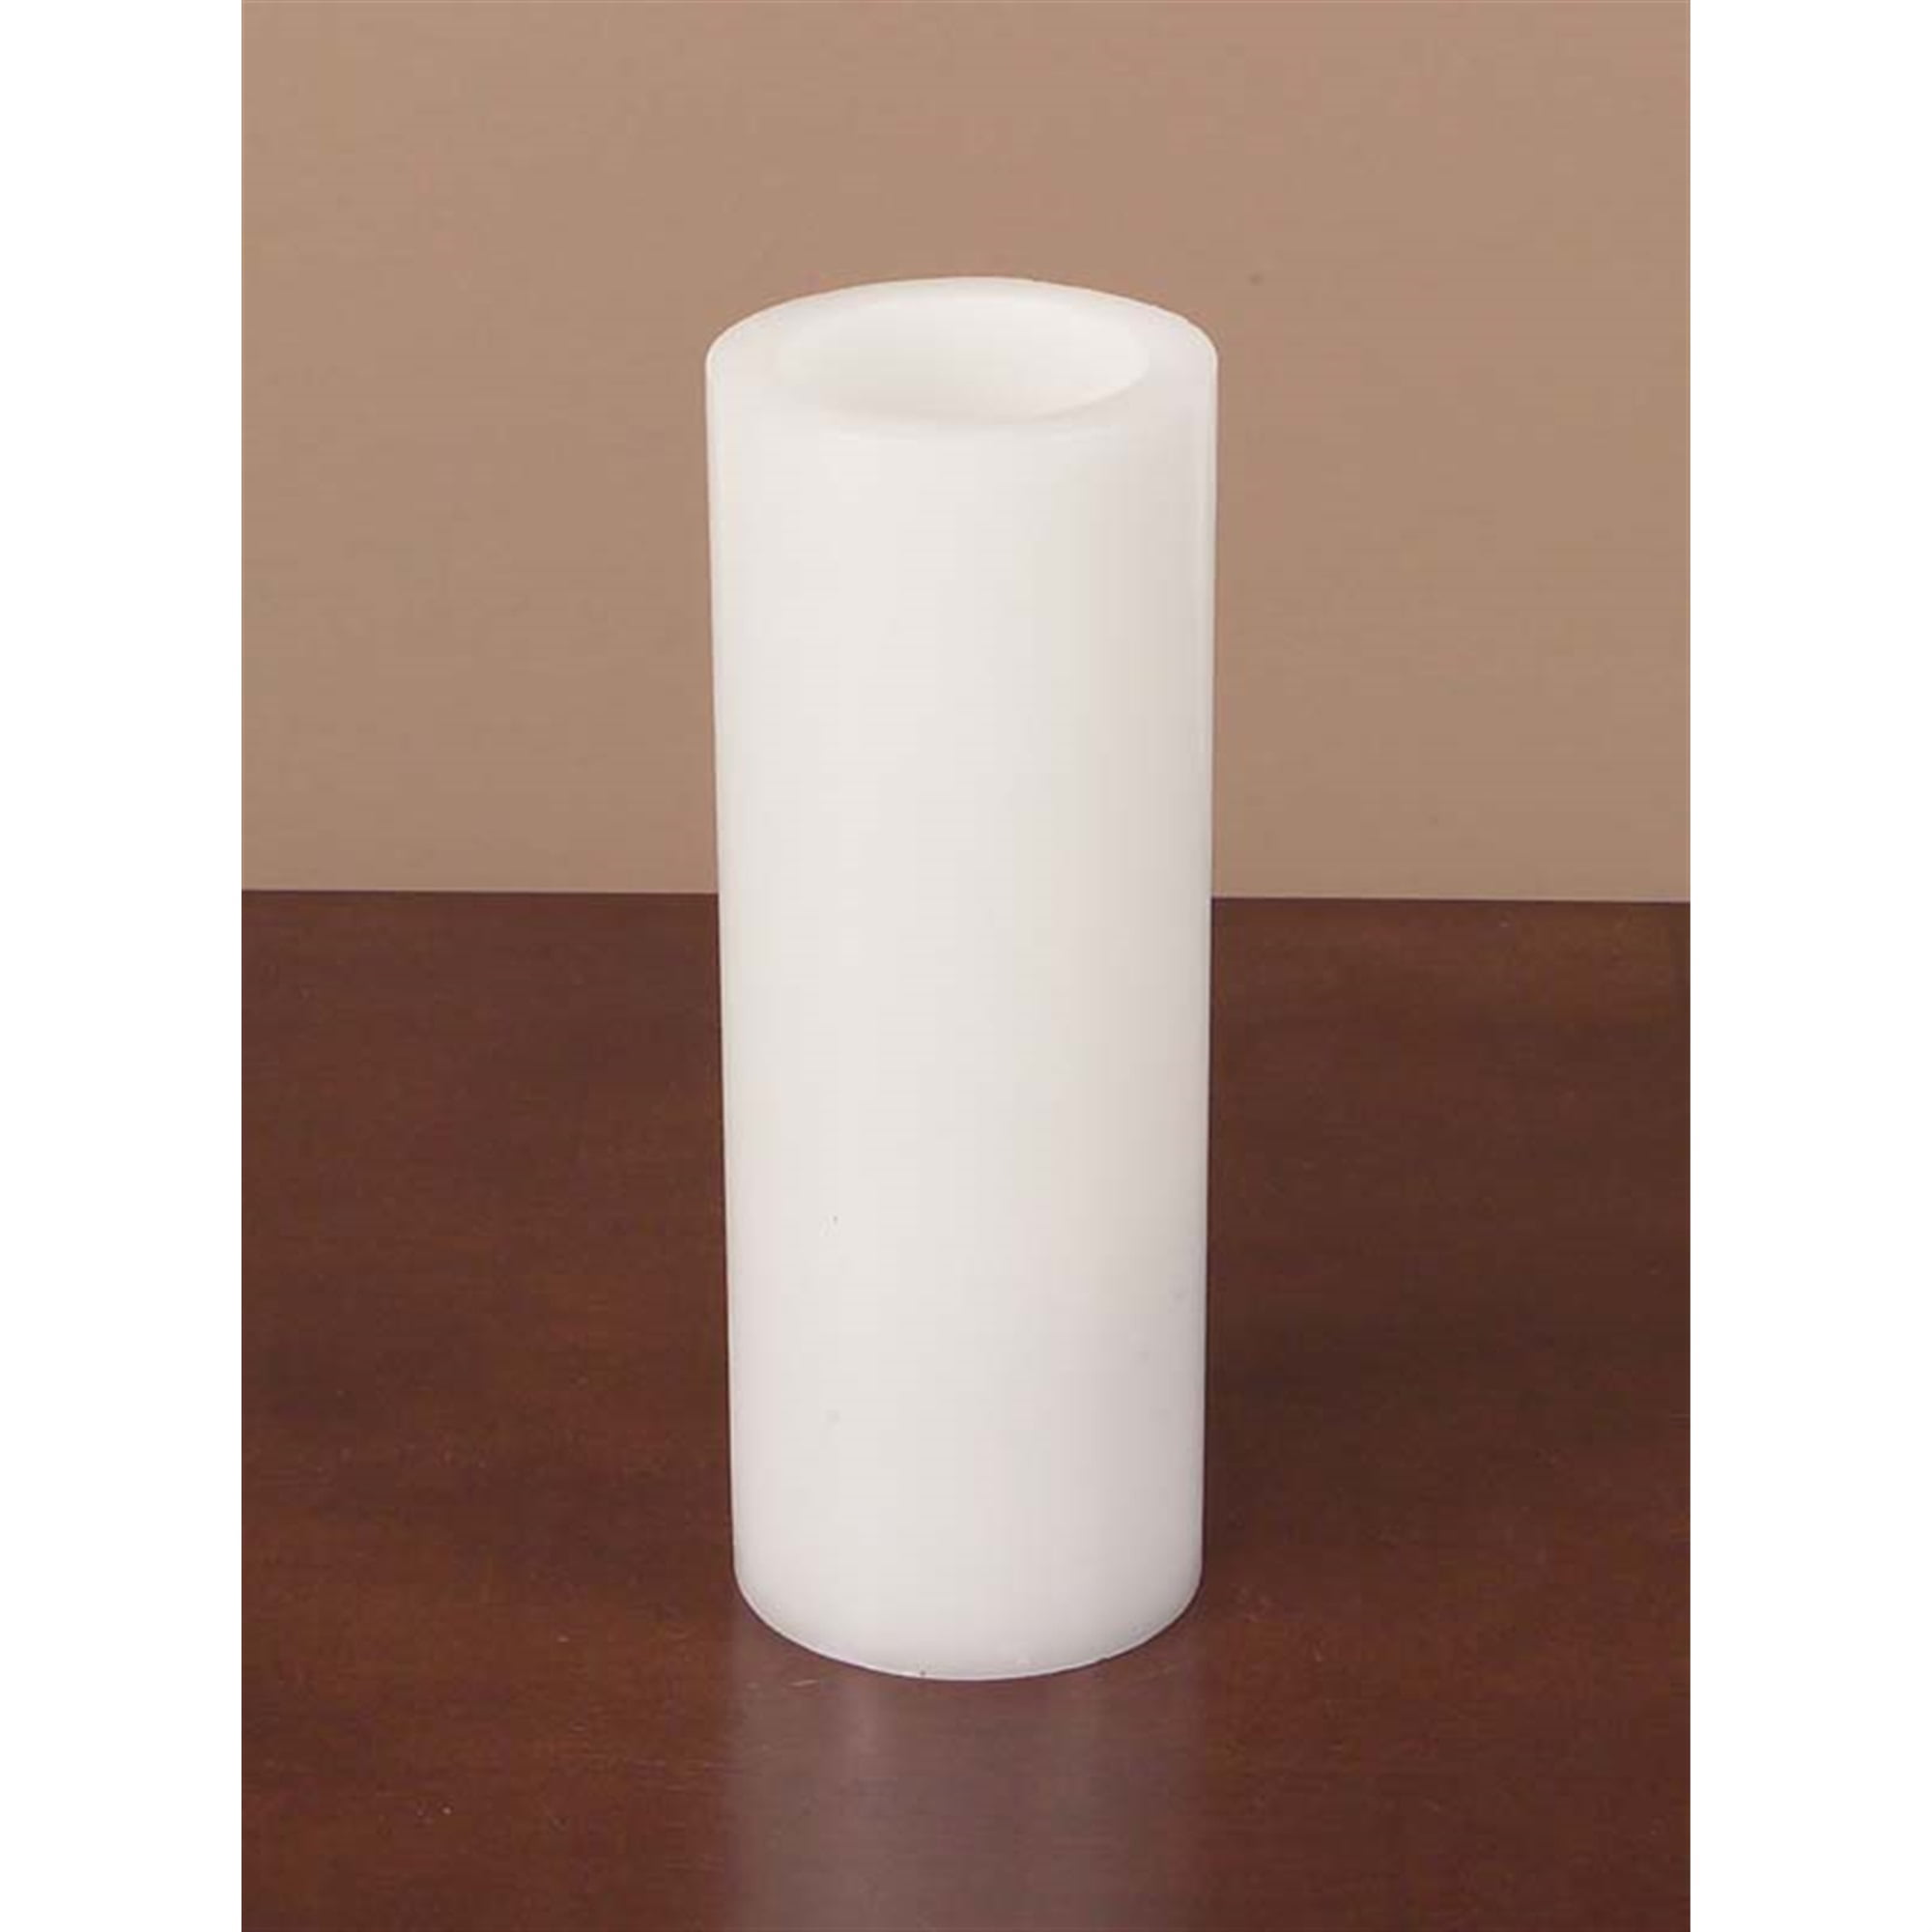 LED Wax Pillar Candle (Set of 4) 3"Dx8"H Wax/Plastic - 2 C Batteries Not Incld